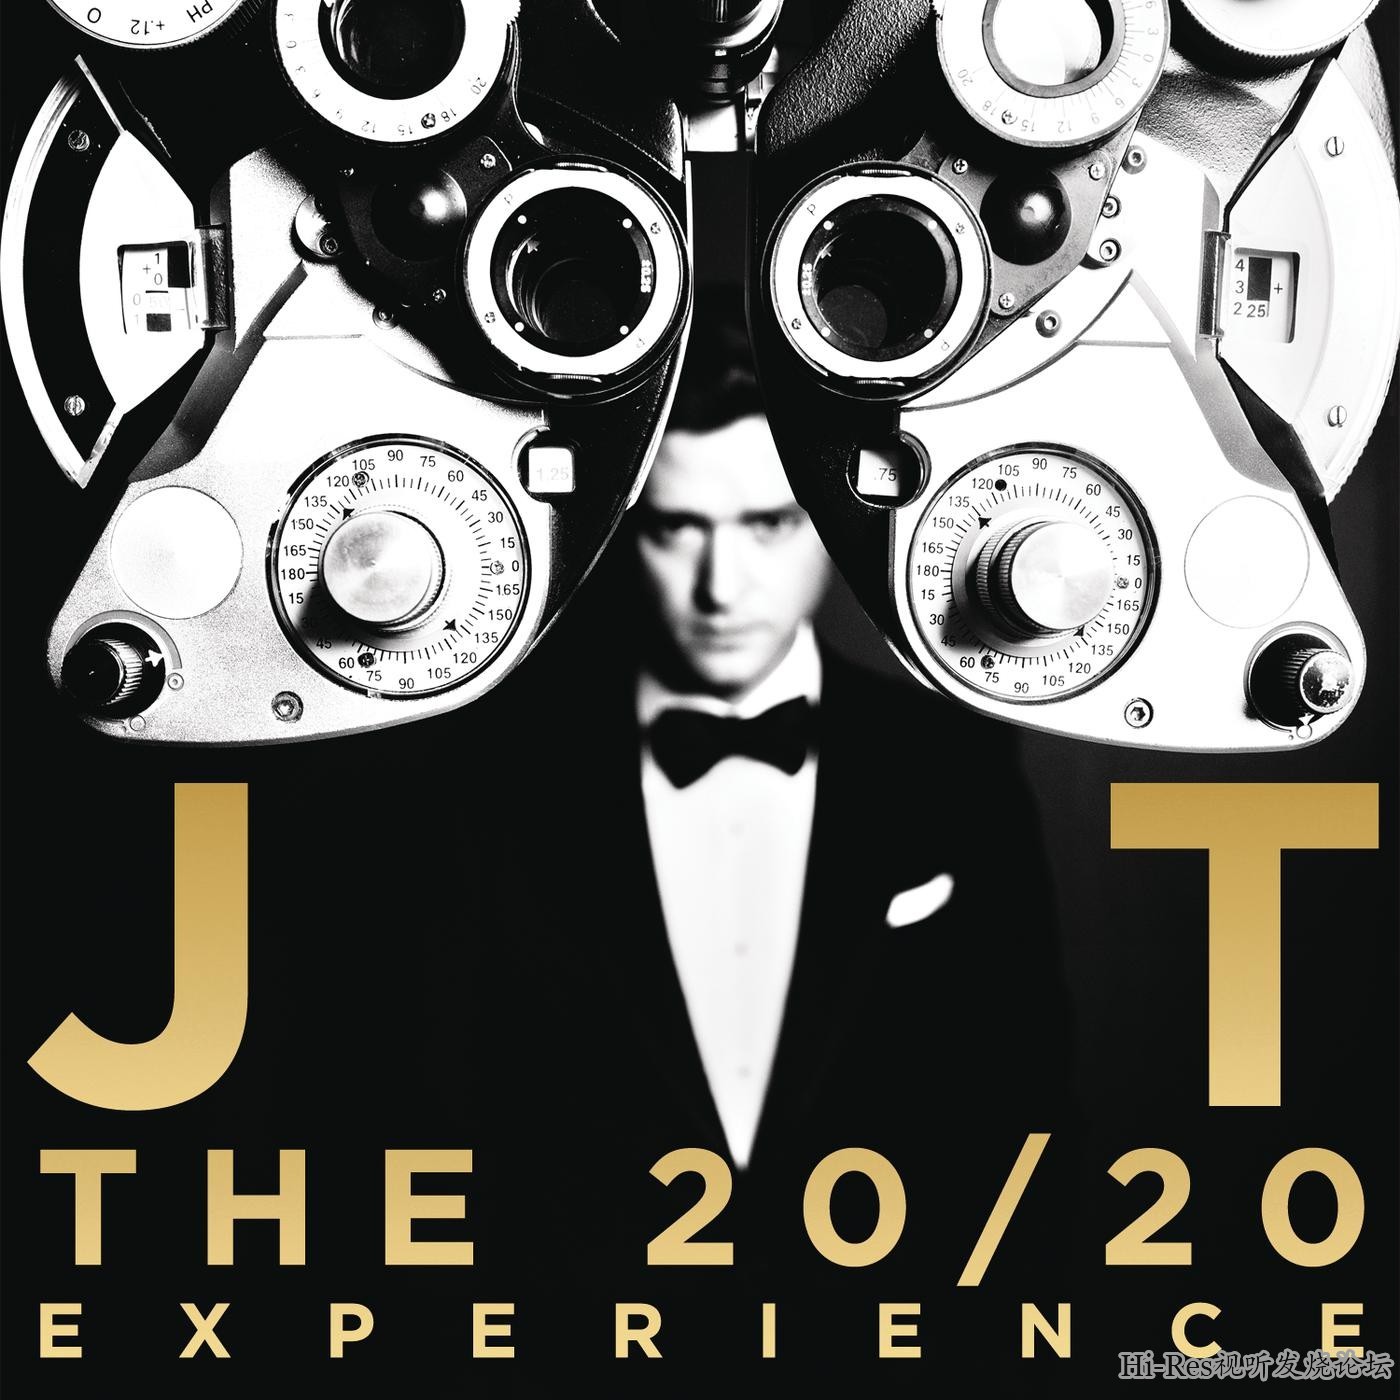 Justin_Timberlake-The_20_20_Experience_Deluxe_Vers.jpg